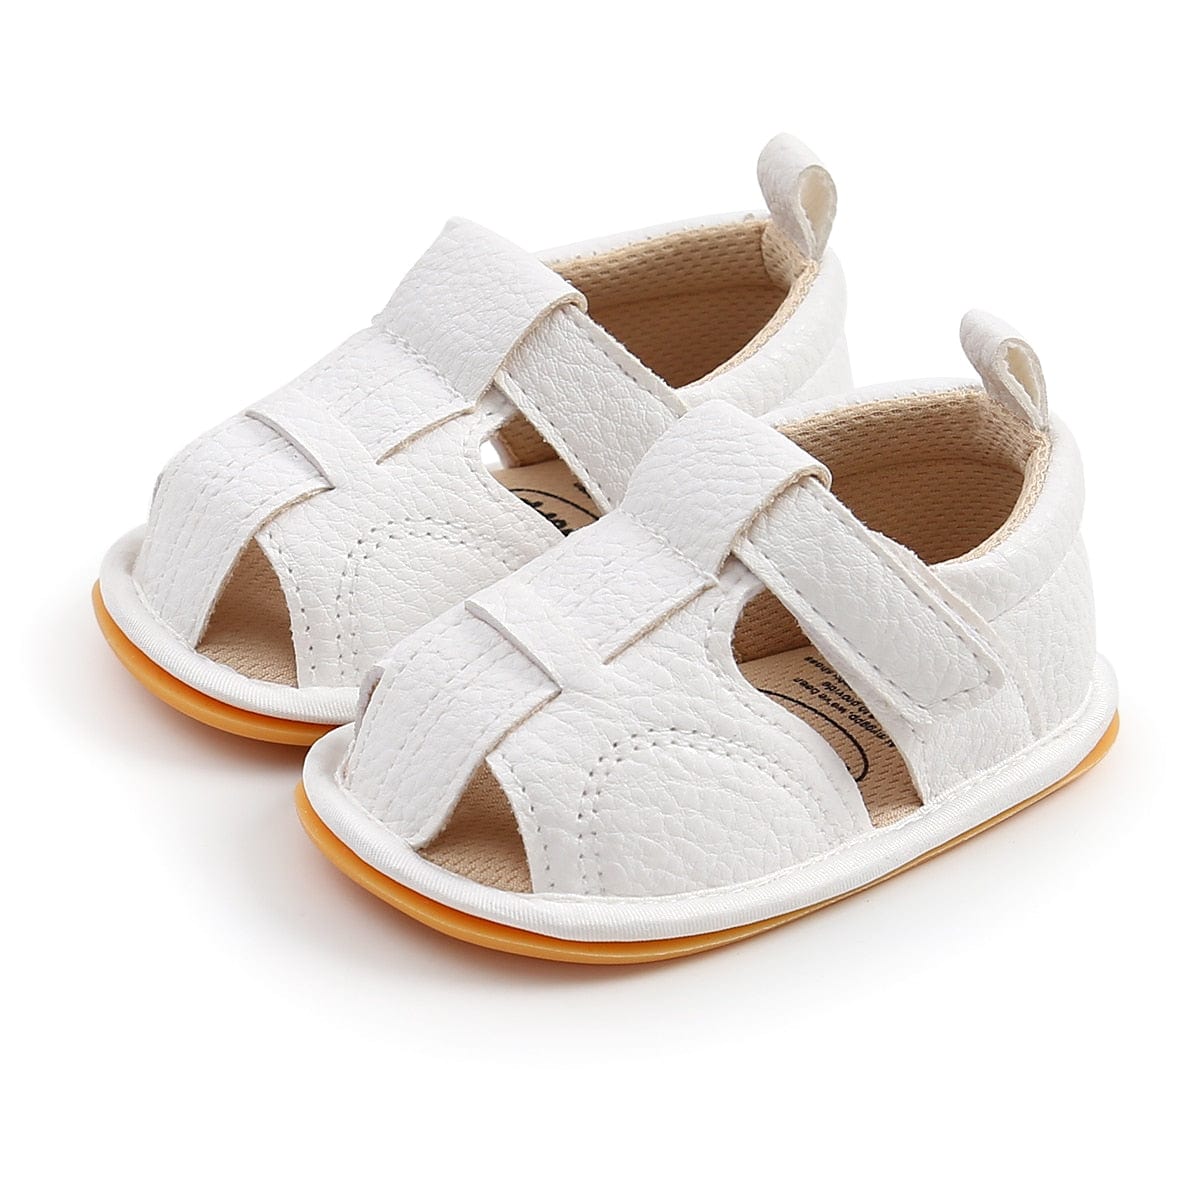 Proactive Baby Baby Footwear MYGGPP Cute & Fashionable Baby Sandals For Little Ones